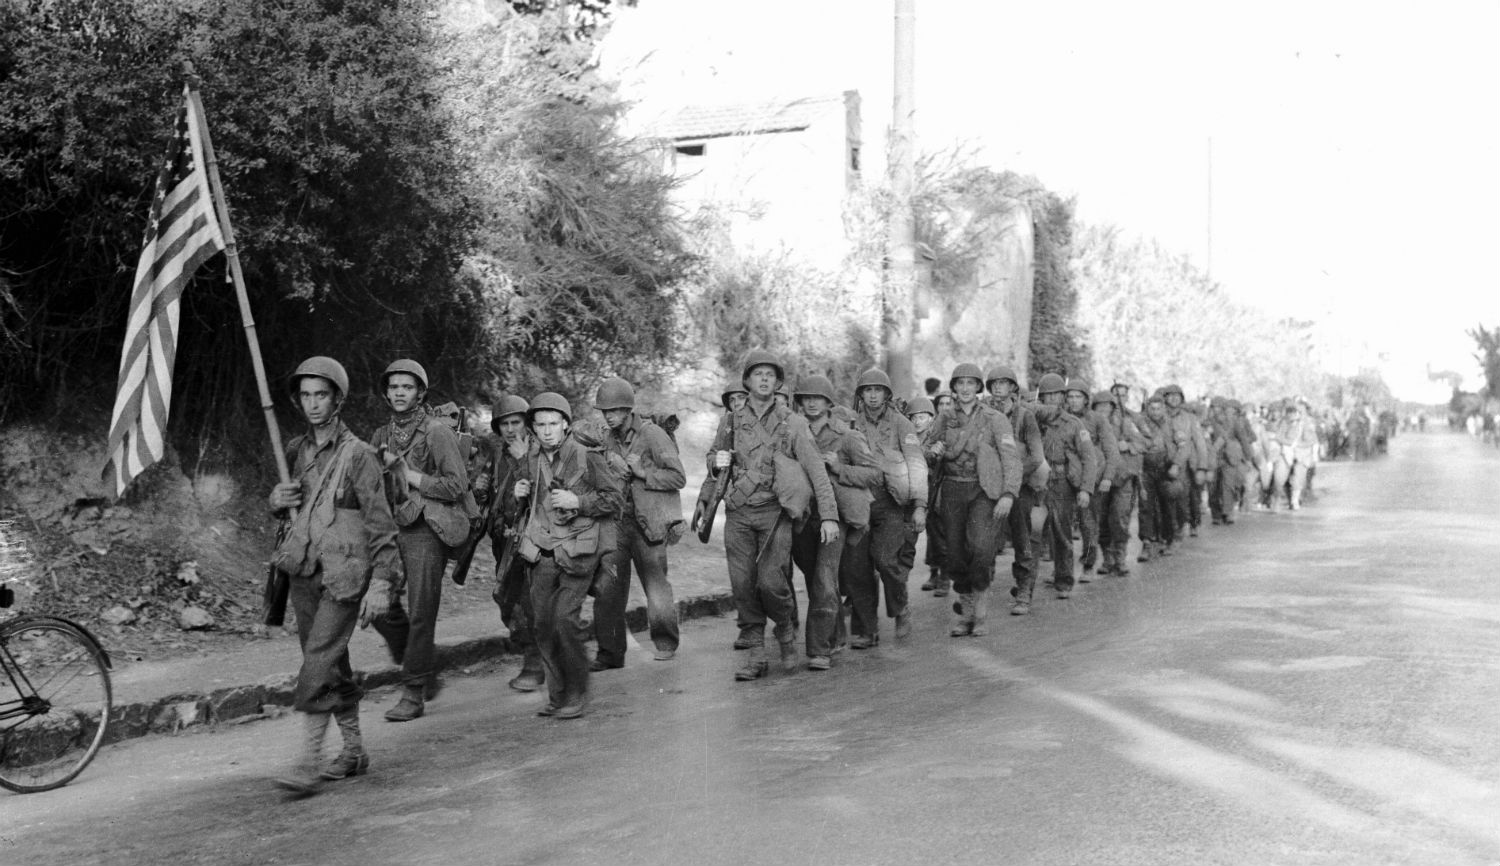 American infantry marching through Algiers after landing during Operation Torch in 1942. Bettmann.
